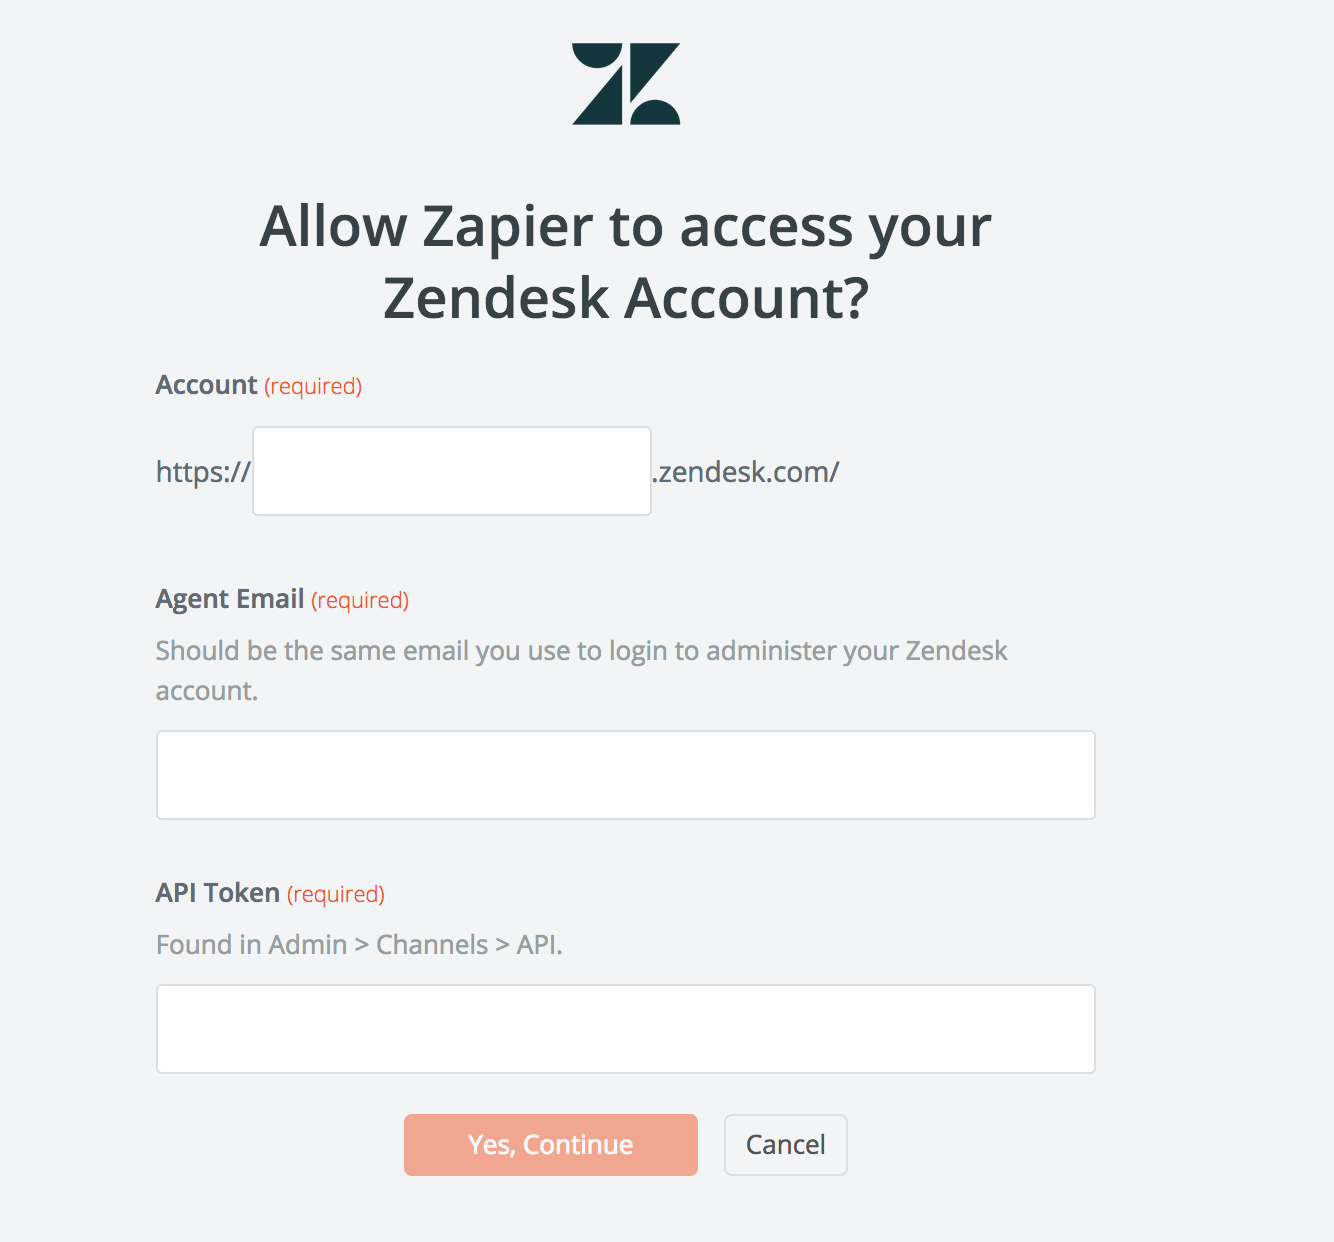 A Zendesk permissions pop-up with the Zendesk app icon and the text "Allow Zapier to access your Zendesk account?".